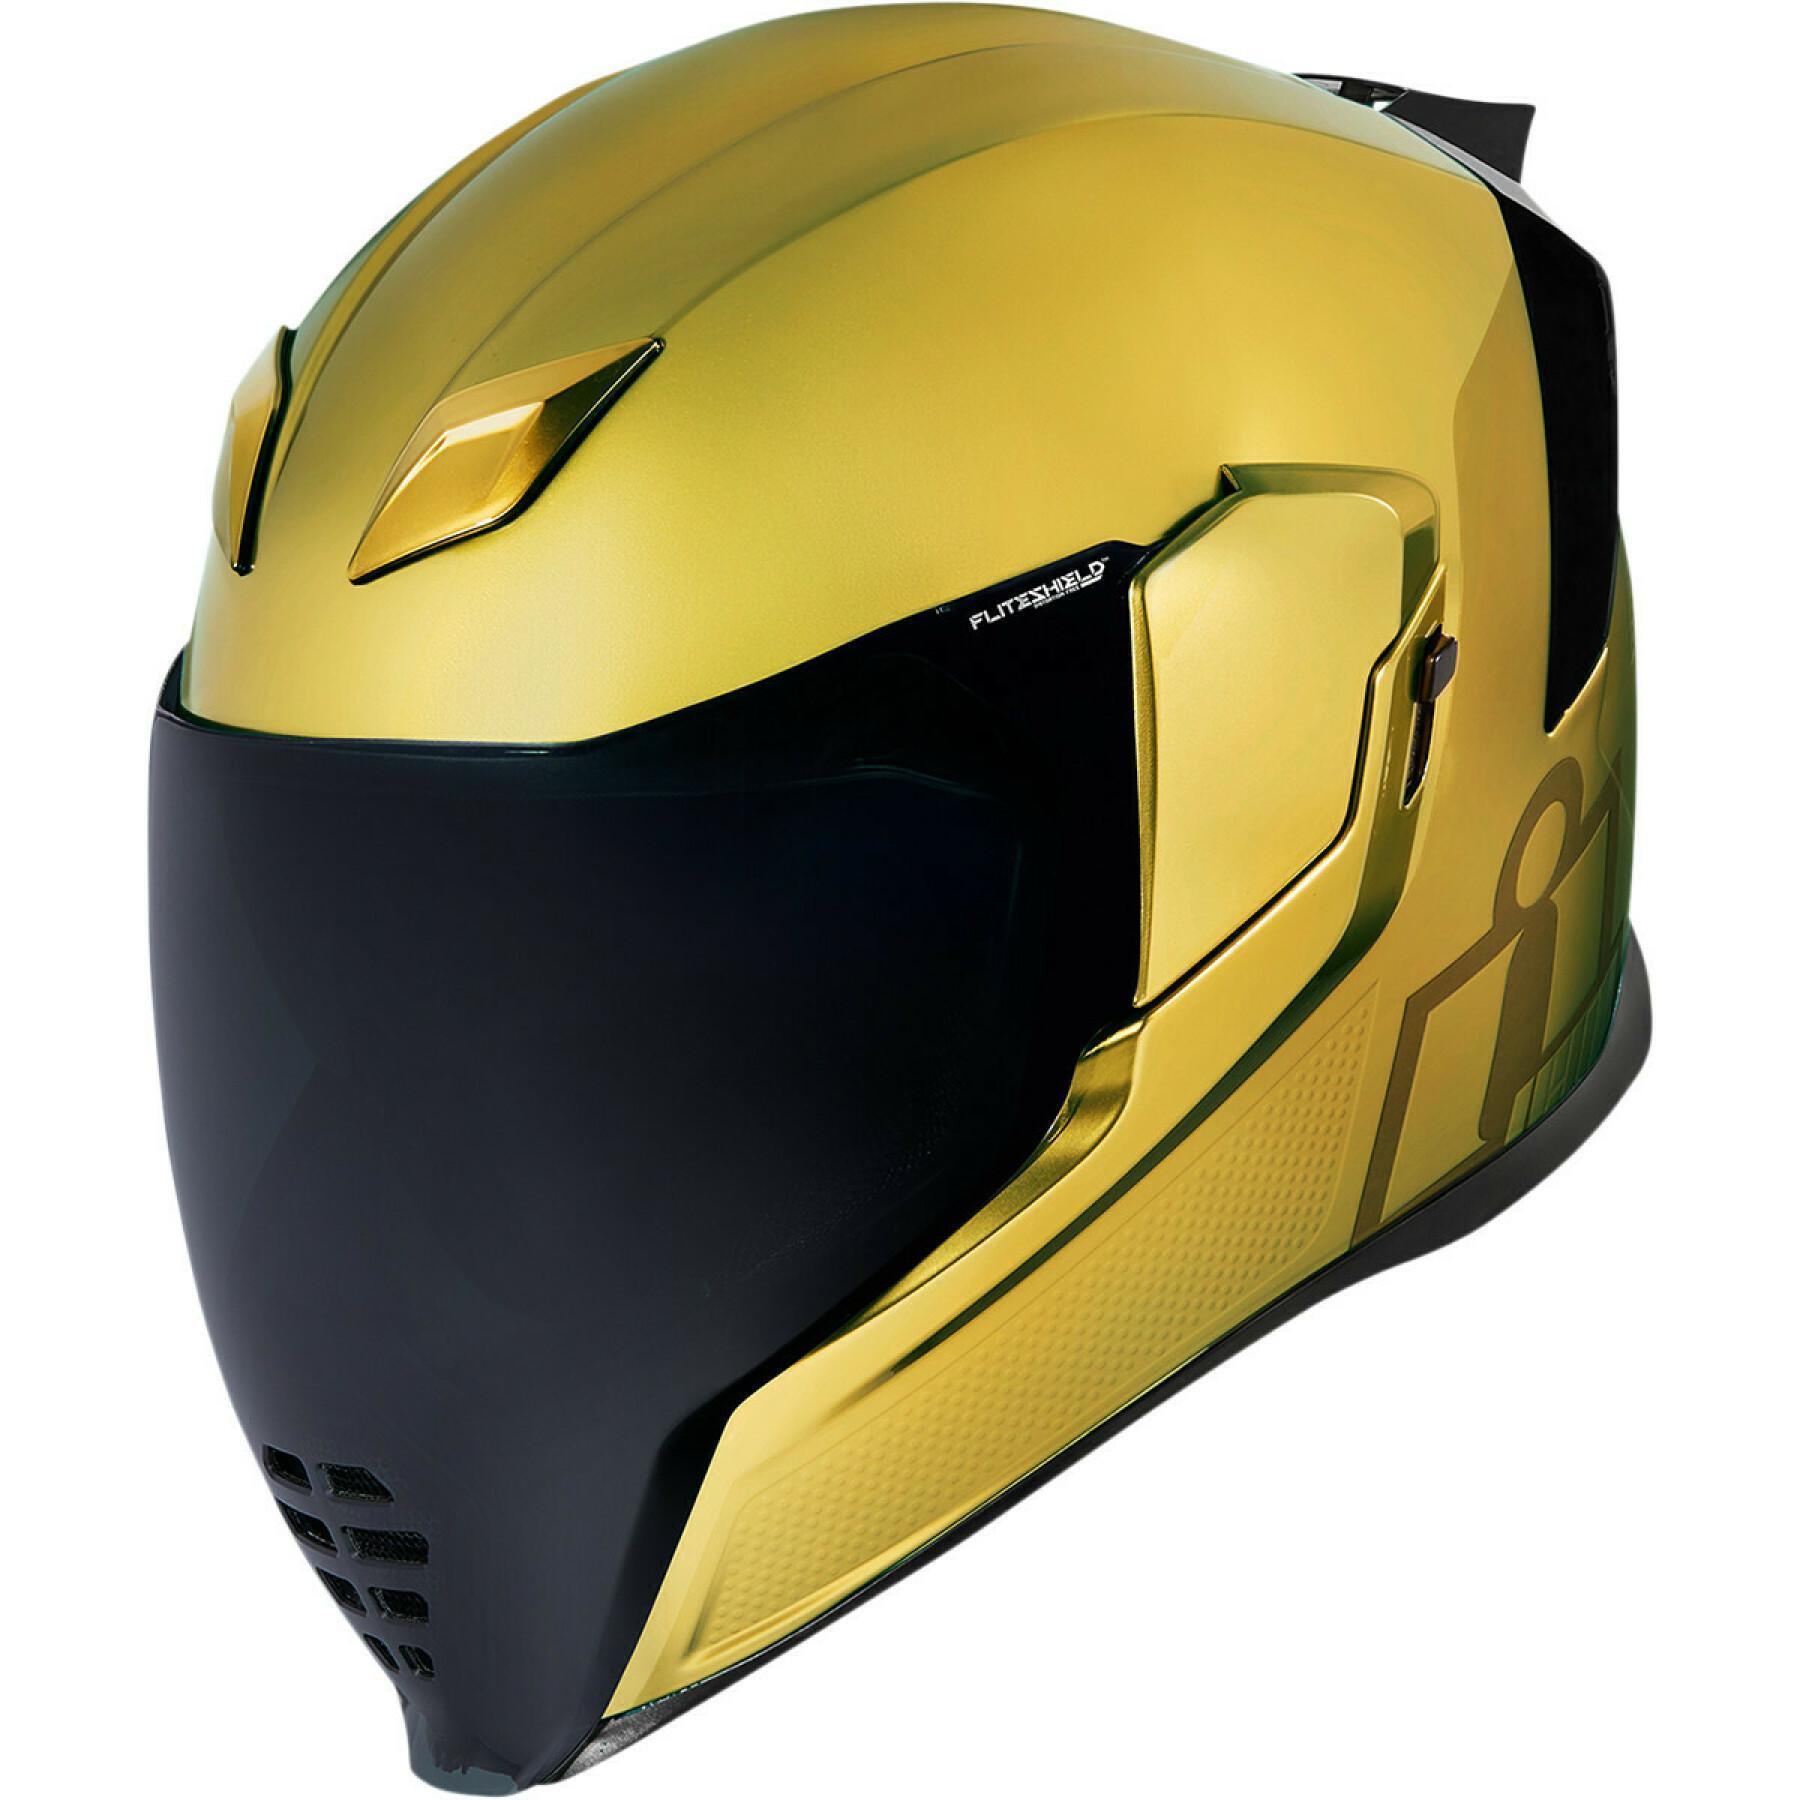 Full face motorcycle helmet Icon aflt mips jewl go